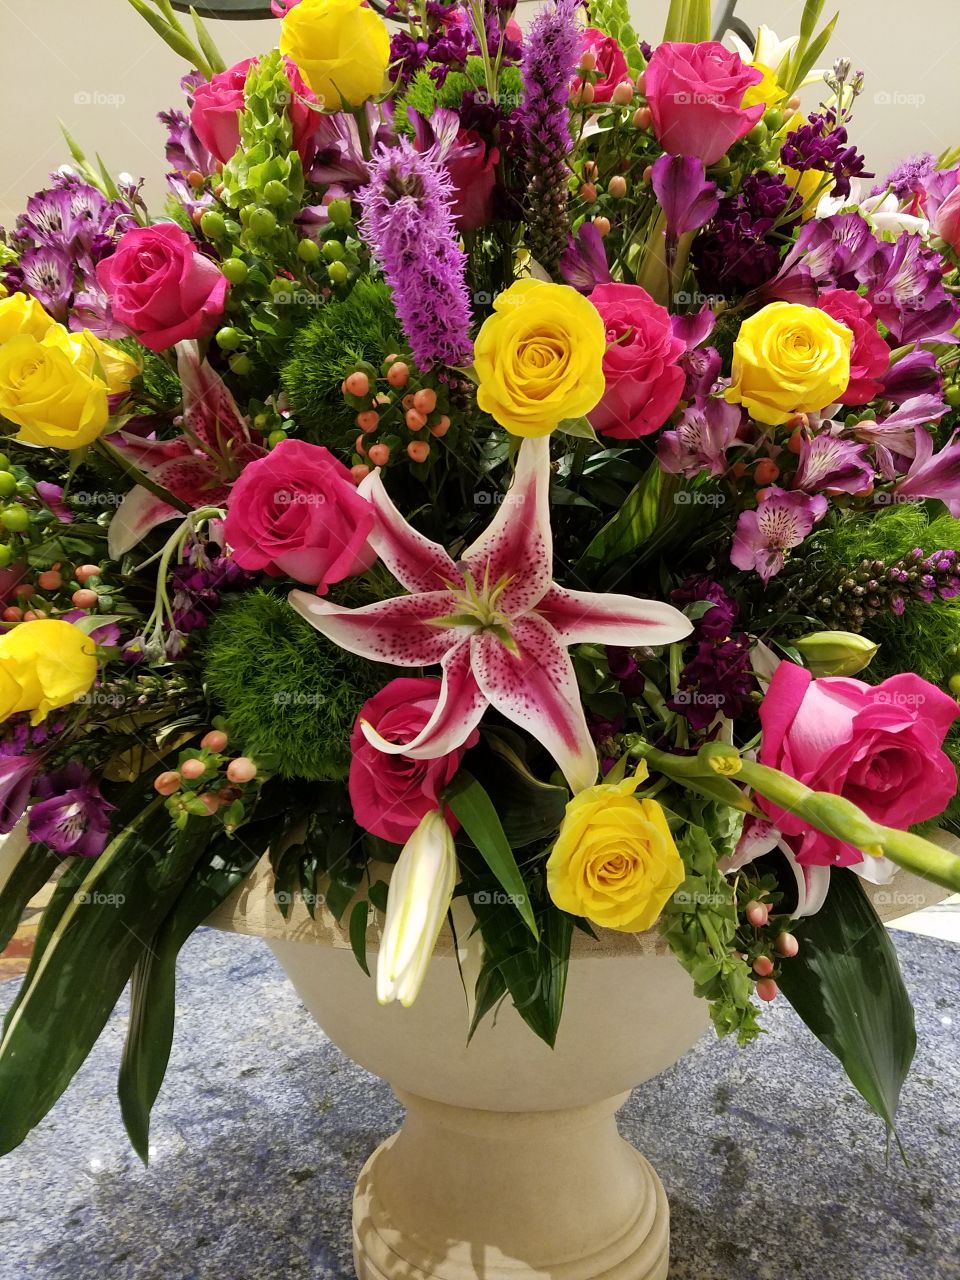 flower arrangement variety of roses lilies and others vibrant colors centerpiece for large round marble table